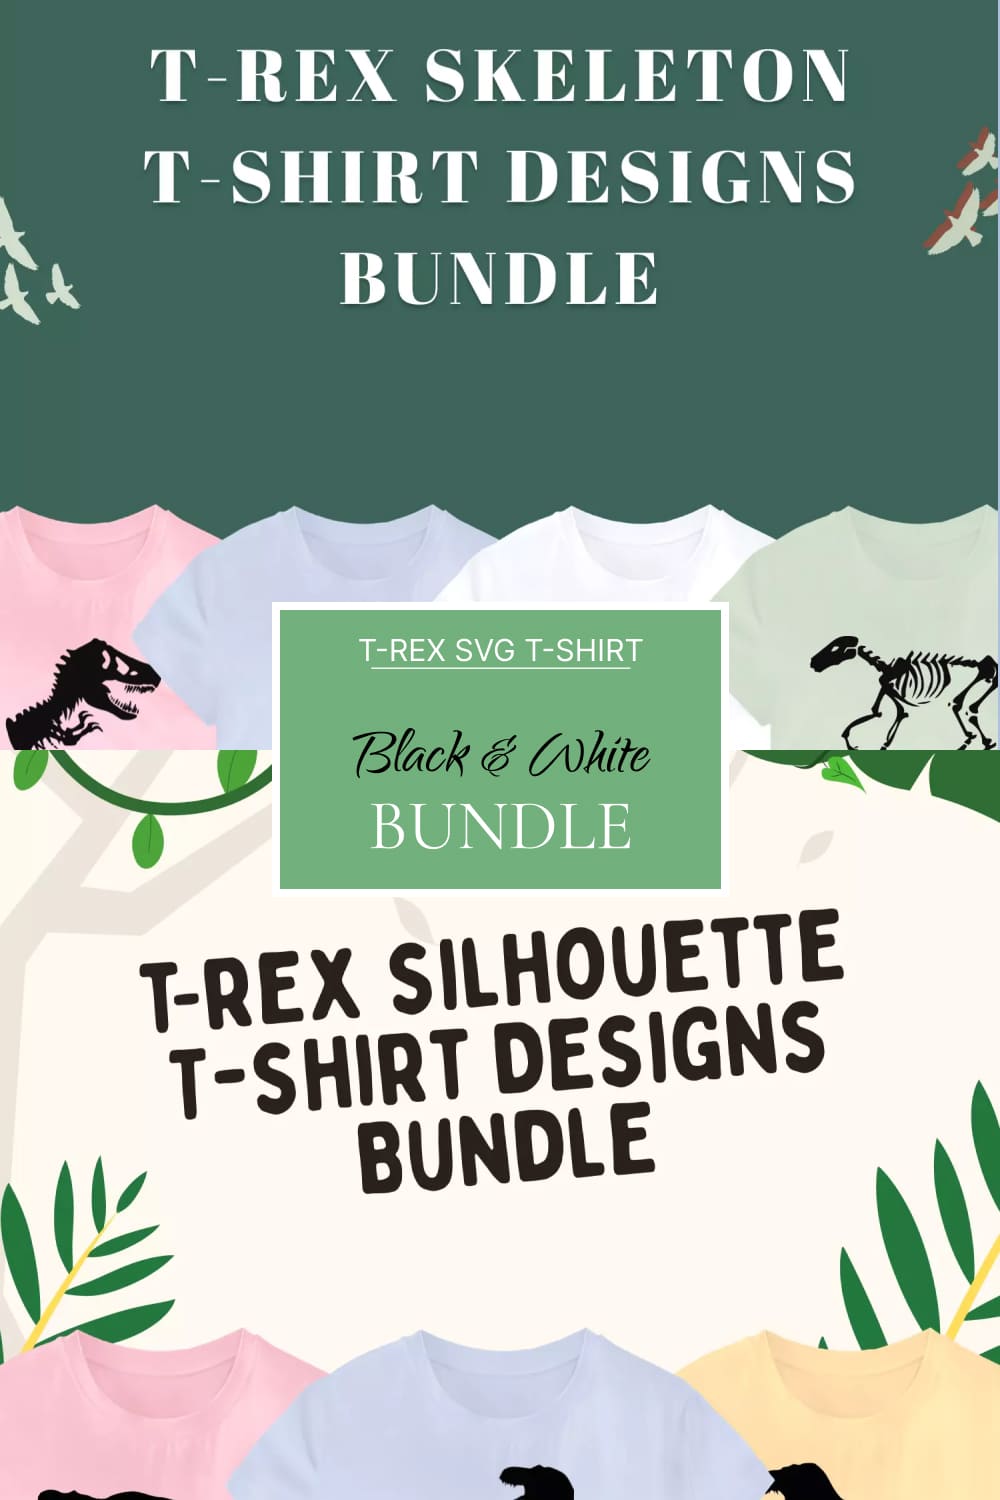 Collection of images of T-shirts with colorful t-rex print.